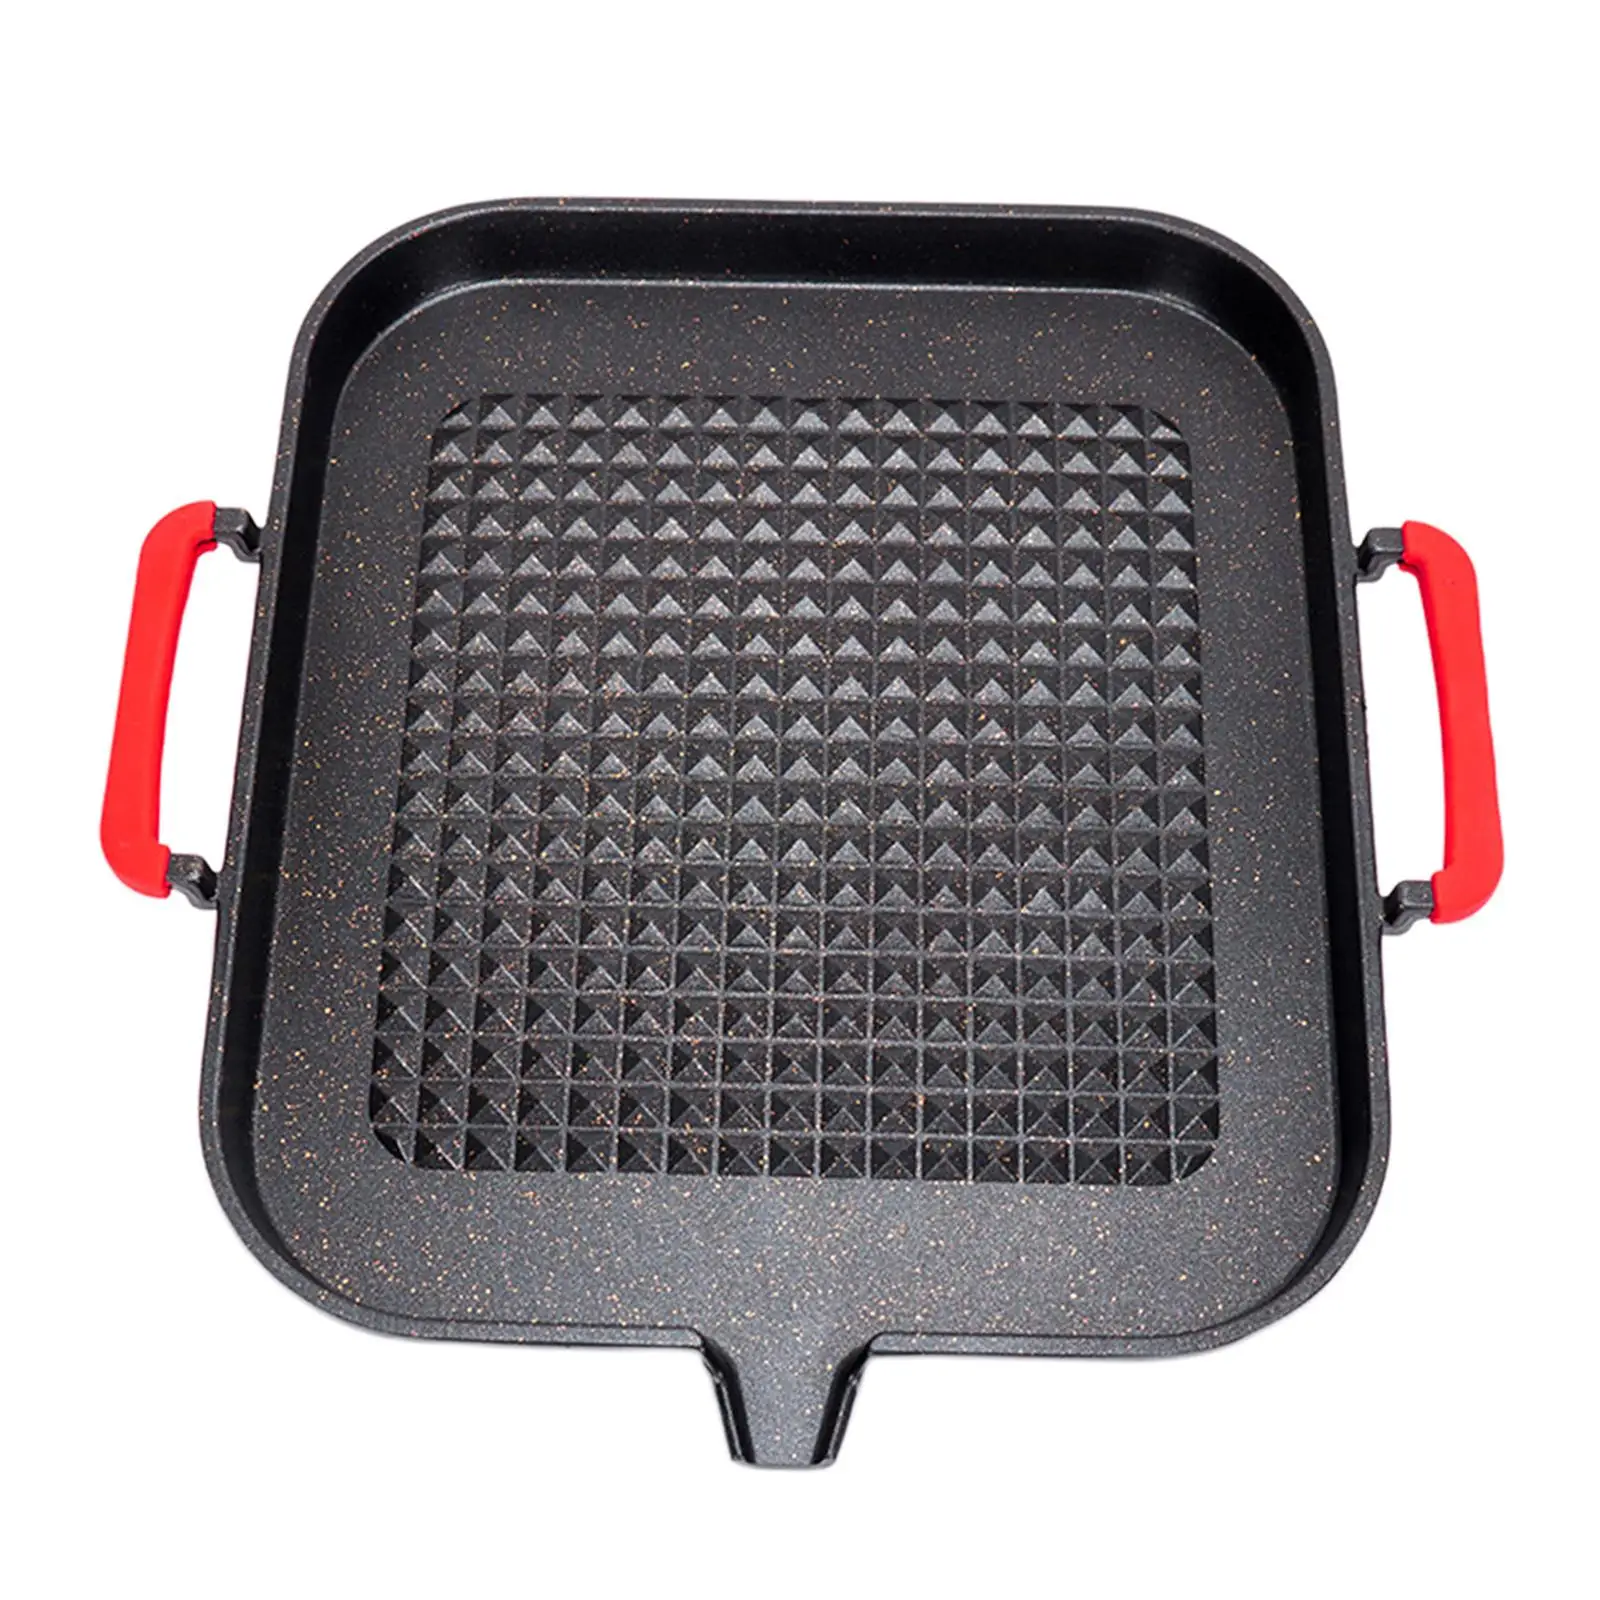 Premium Cook Non-Stick Grill Pan, Cast Aluminium Non Stick Frying Pan with Safety Handle for Outdoor, Camping, BBQ, Picnic